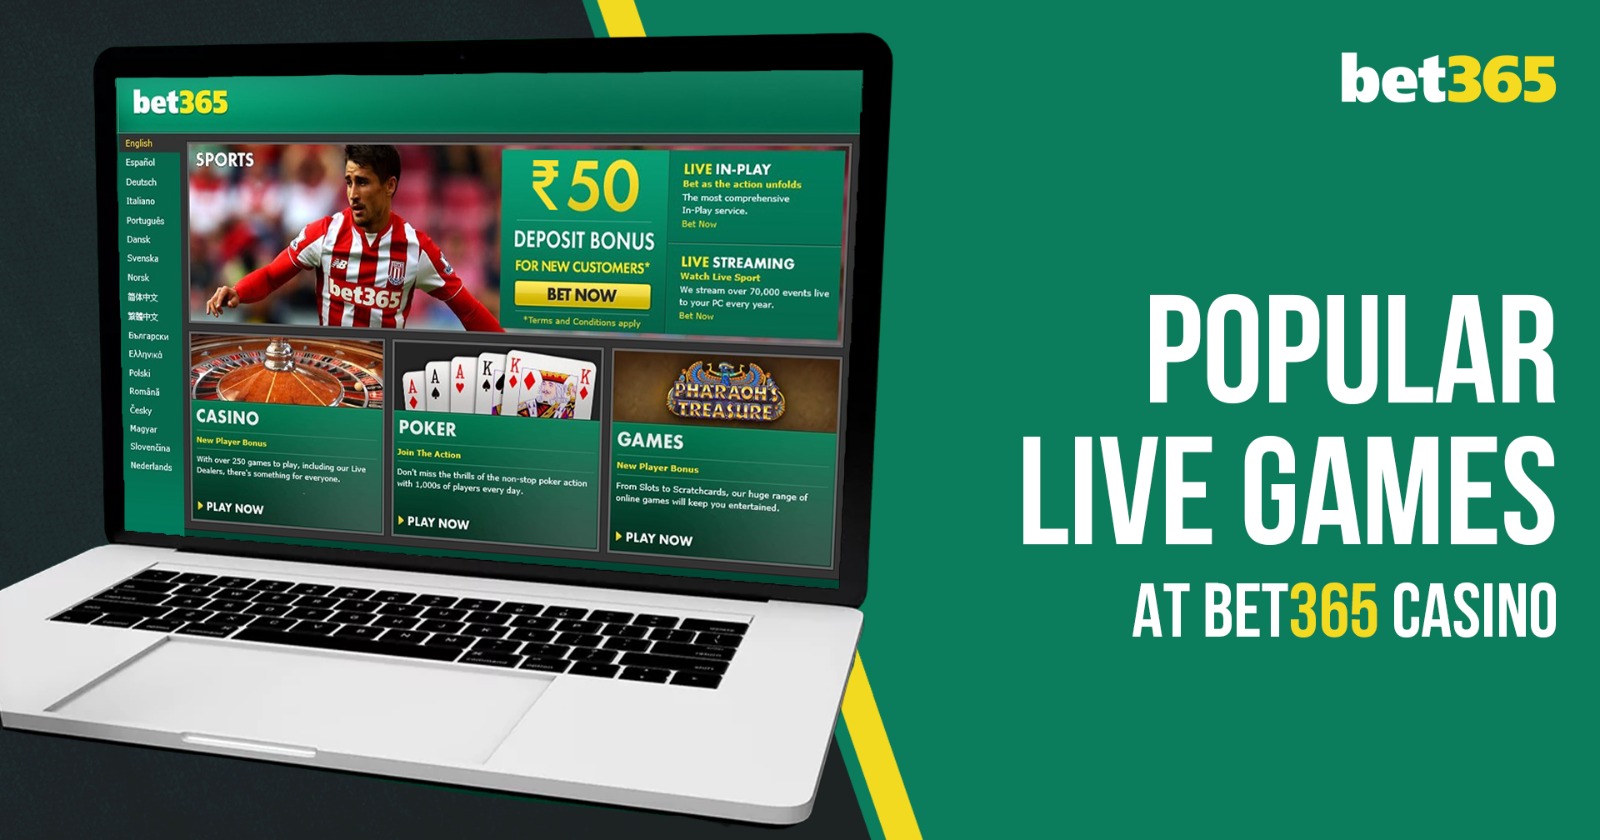 Popular Live Games at bet365 Casino